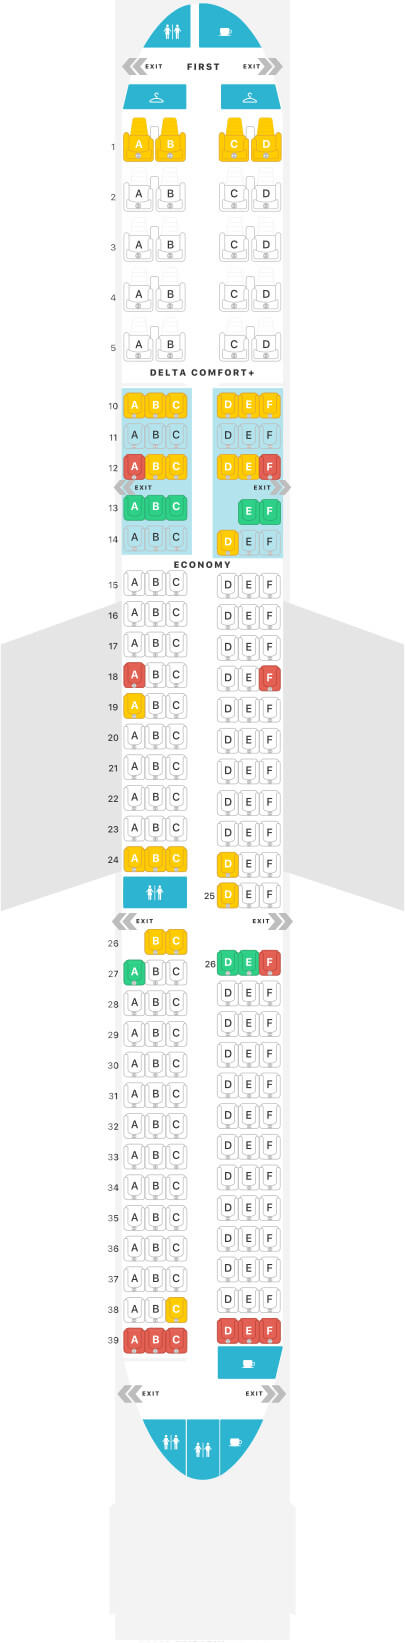 A321Neo Seating Chart